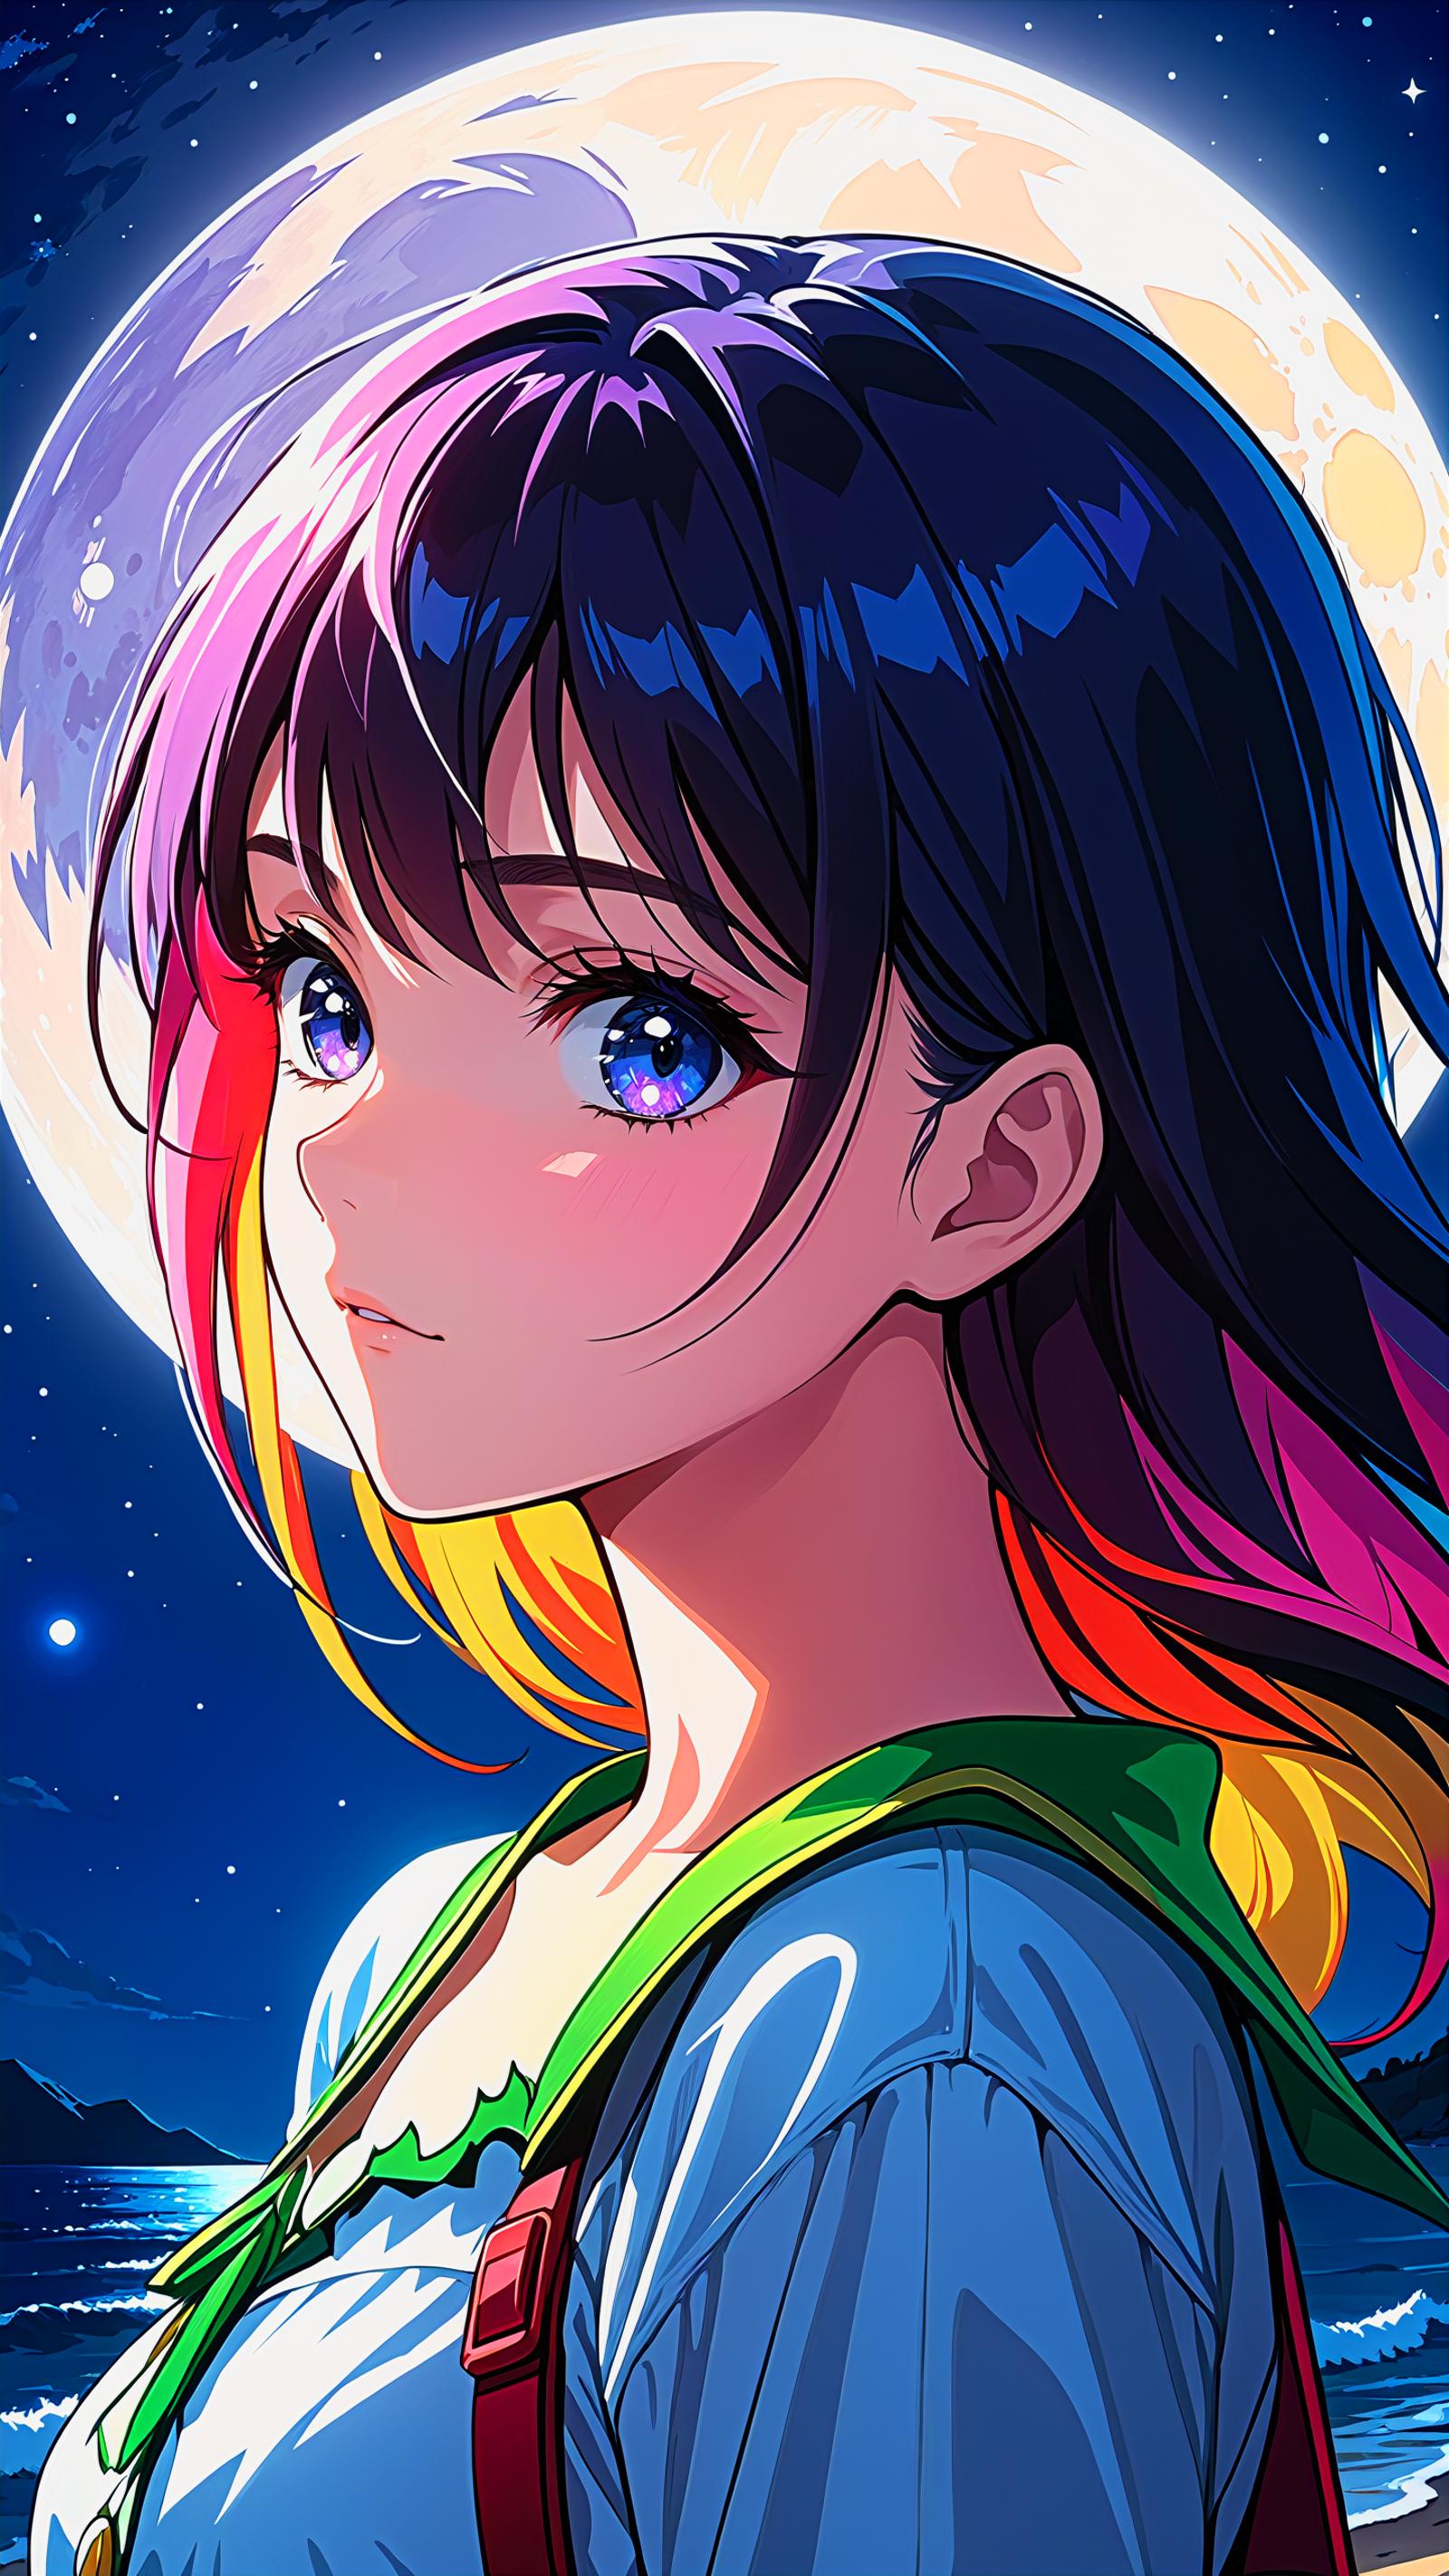 A colorful anime girl with purple hair and blue eyes stands in front of a moonlit sky.